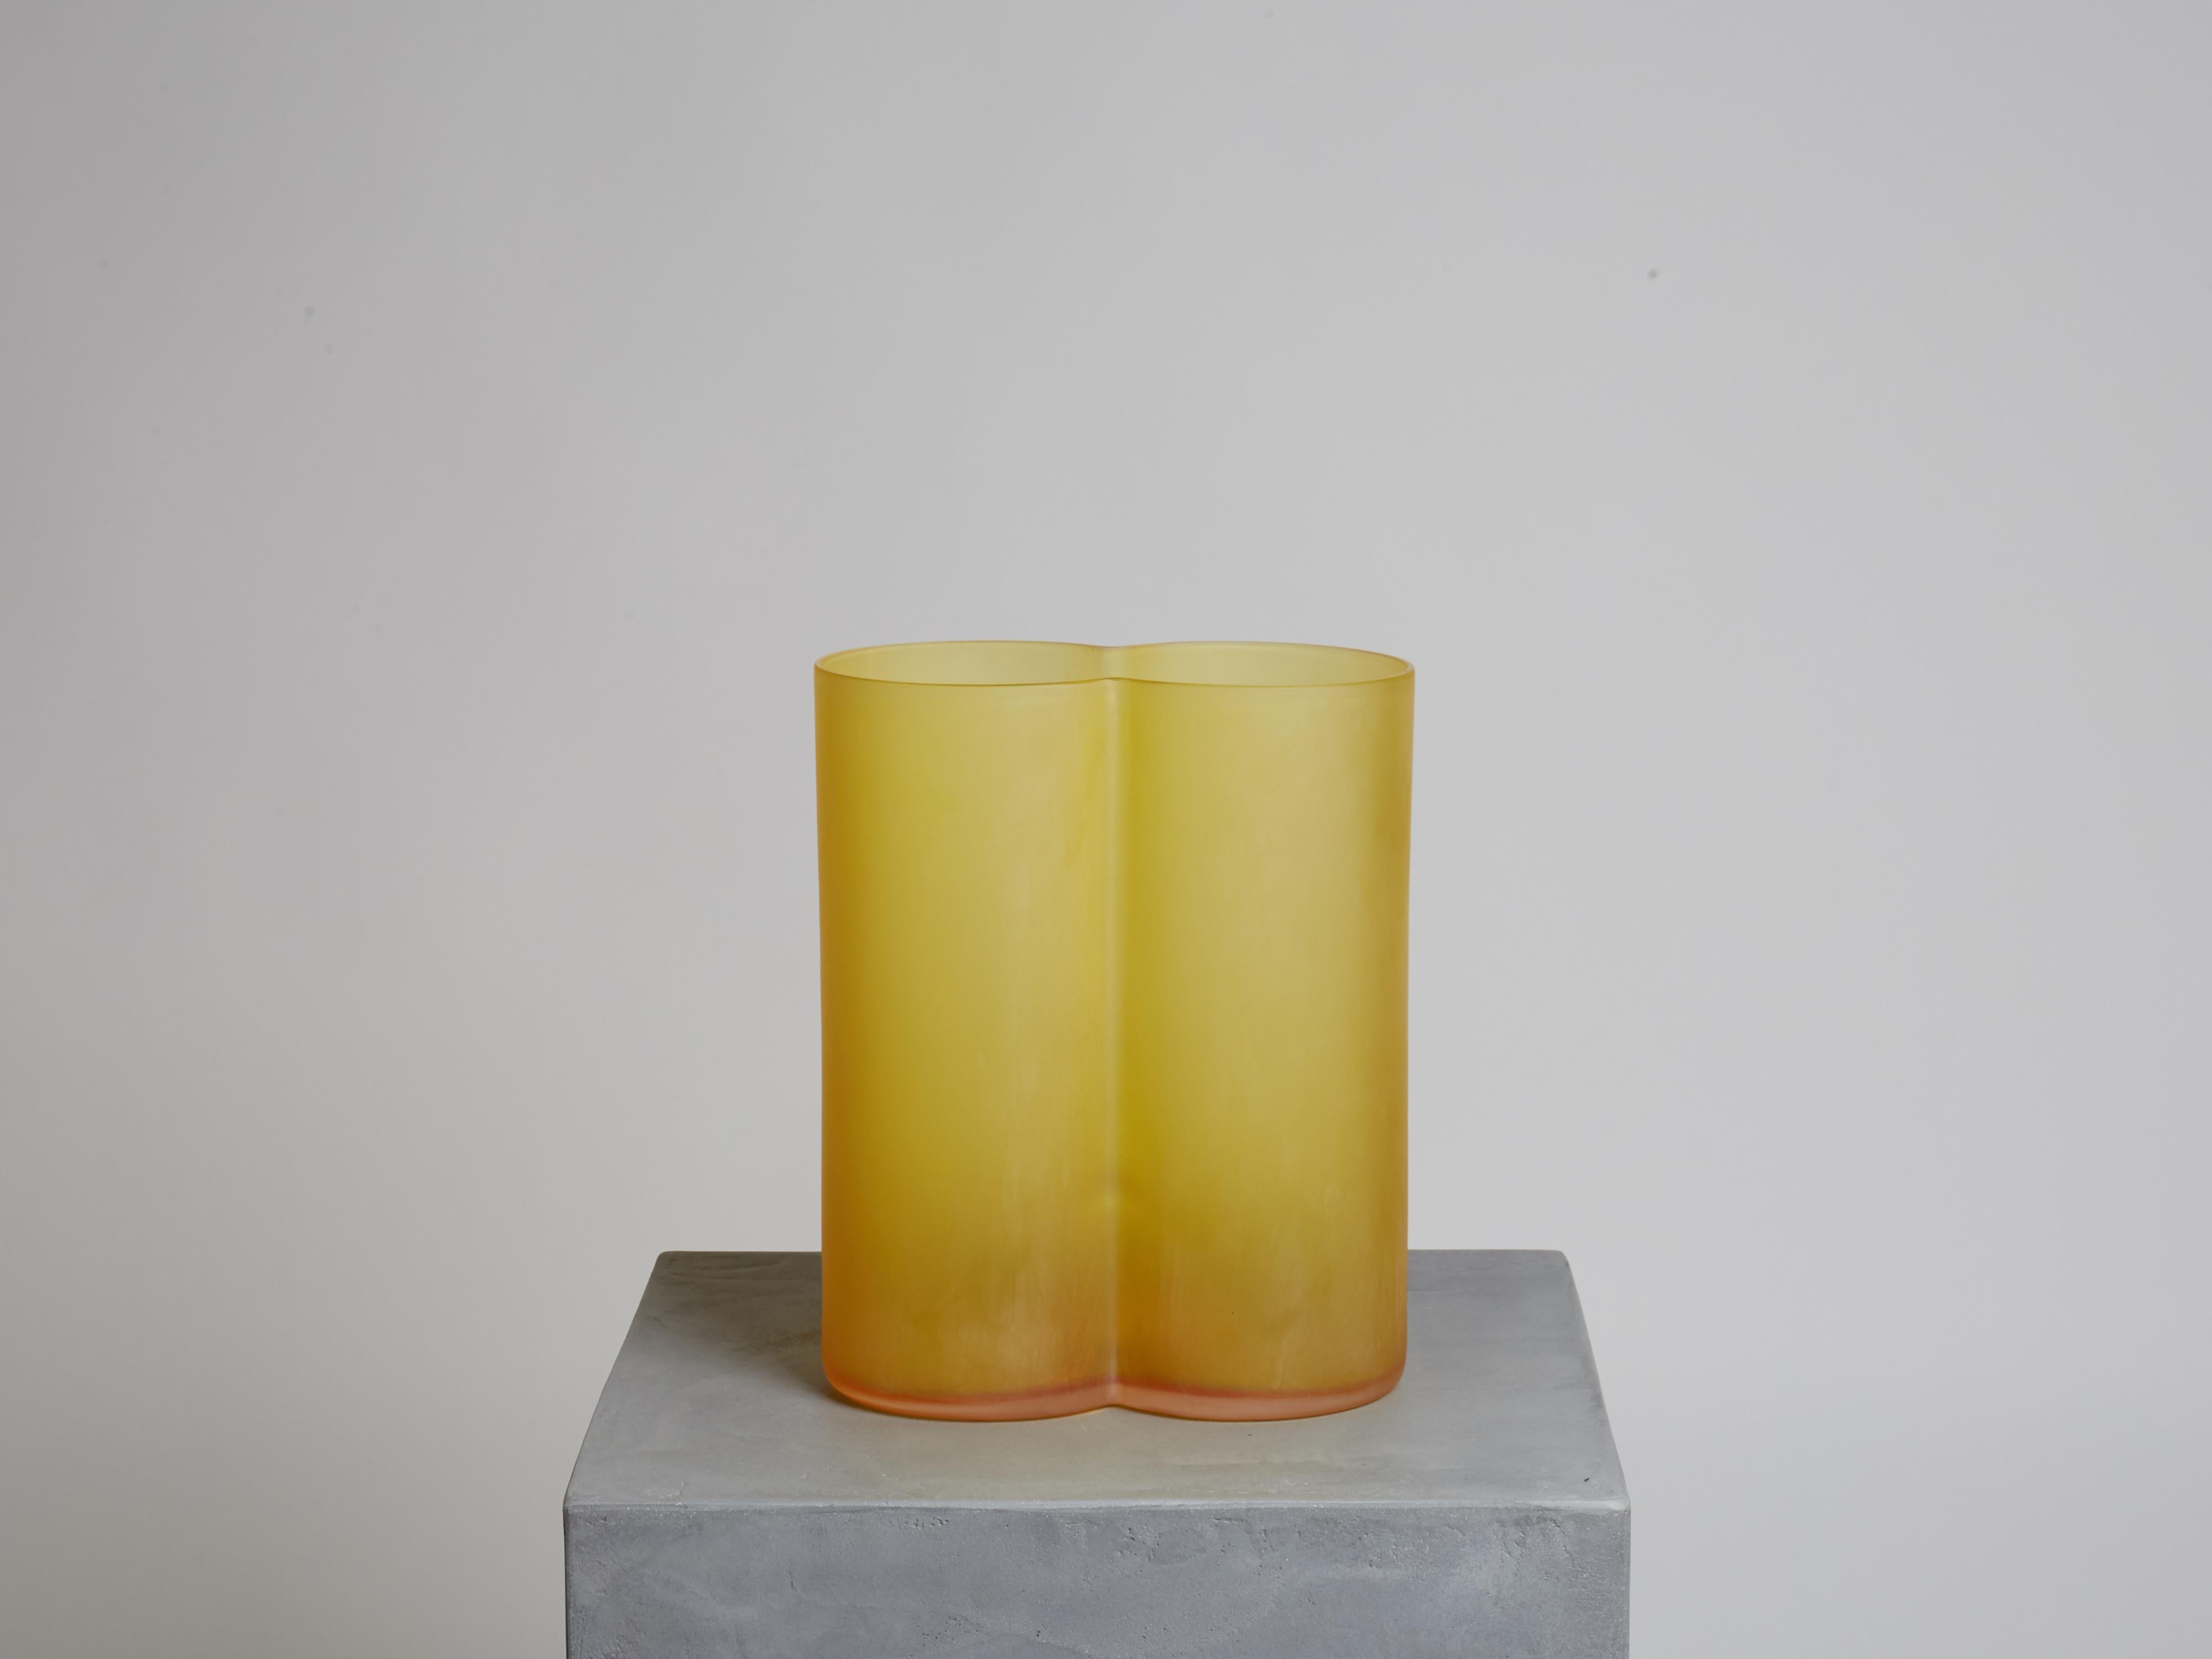 Materials: murano glass, satin finish

Colours: ochre yellow; also available in emerald green or cobalt blue

In January 2017 Calori & Maillard took part to Art City, an event linked to Arte Fiera, with the solo show “Causerie – conversation”